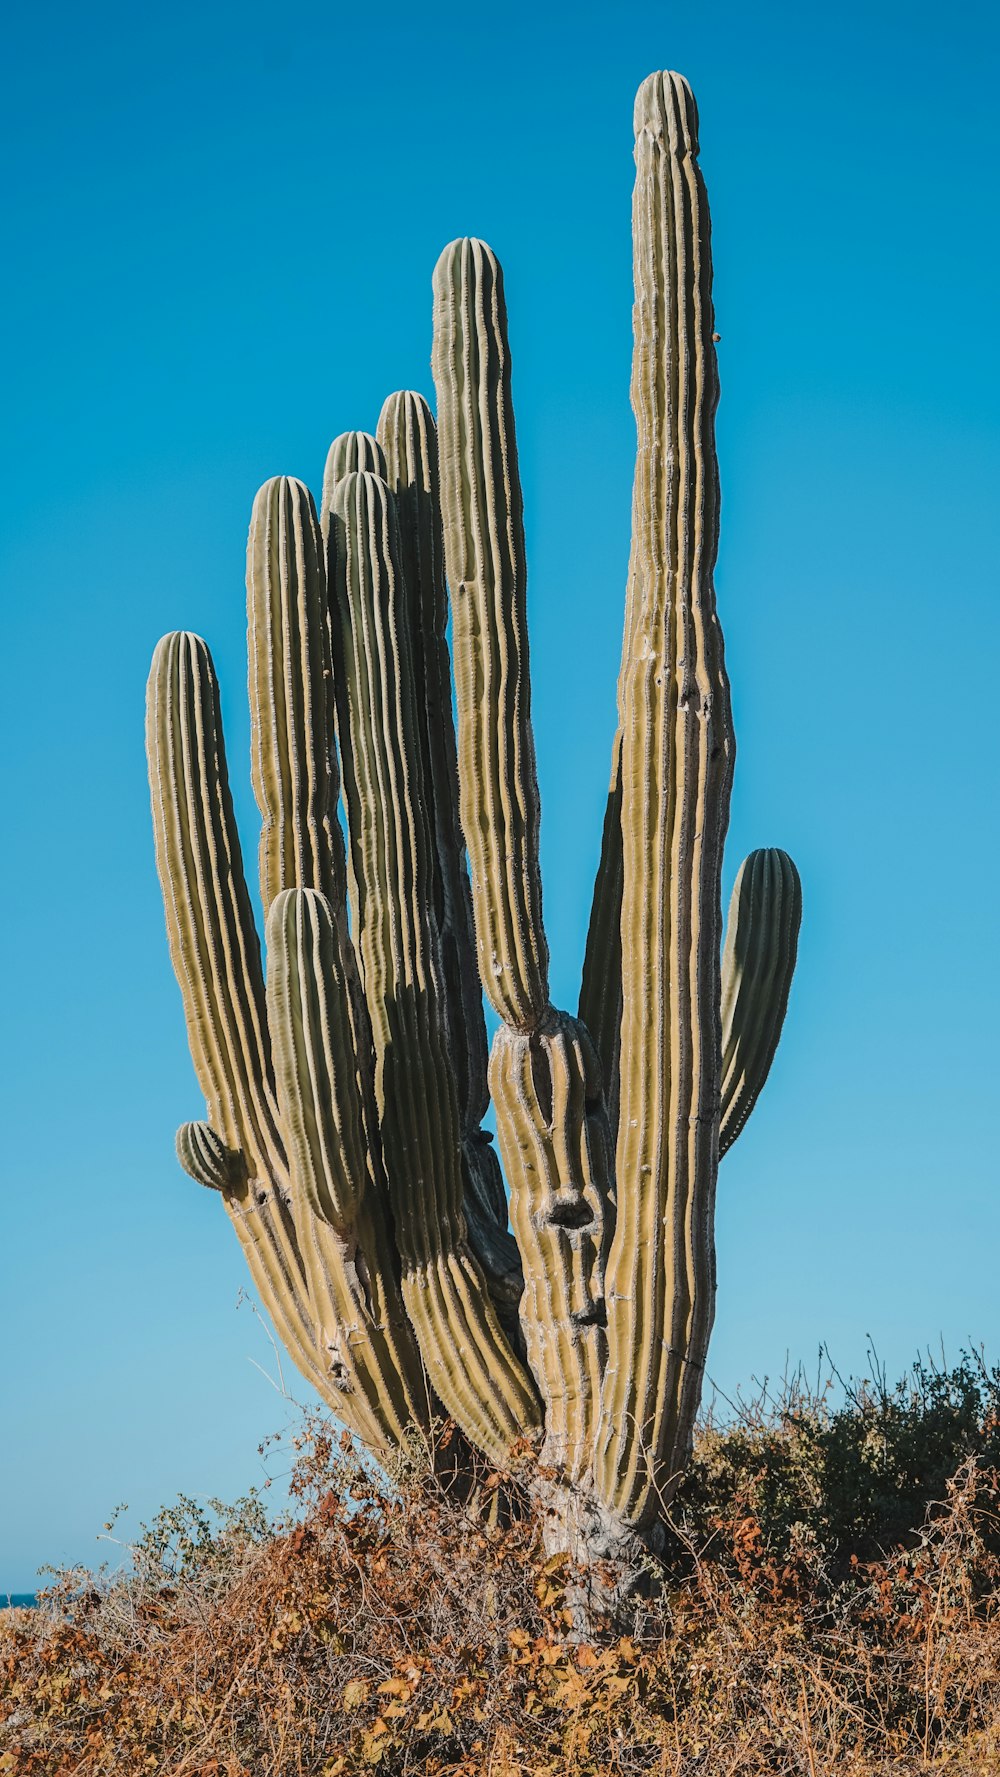 a large cactus in a field with a blue sky in the background